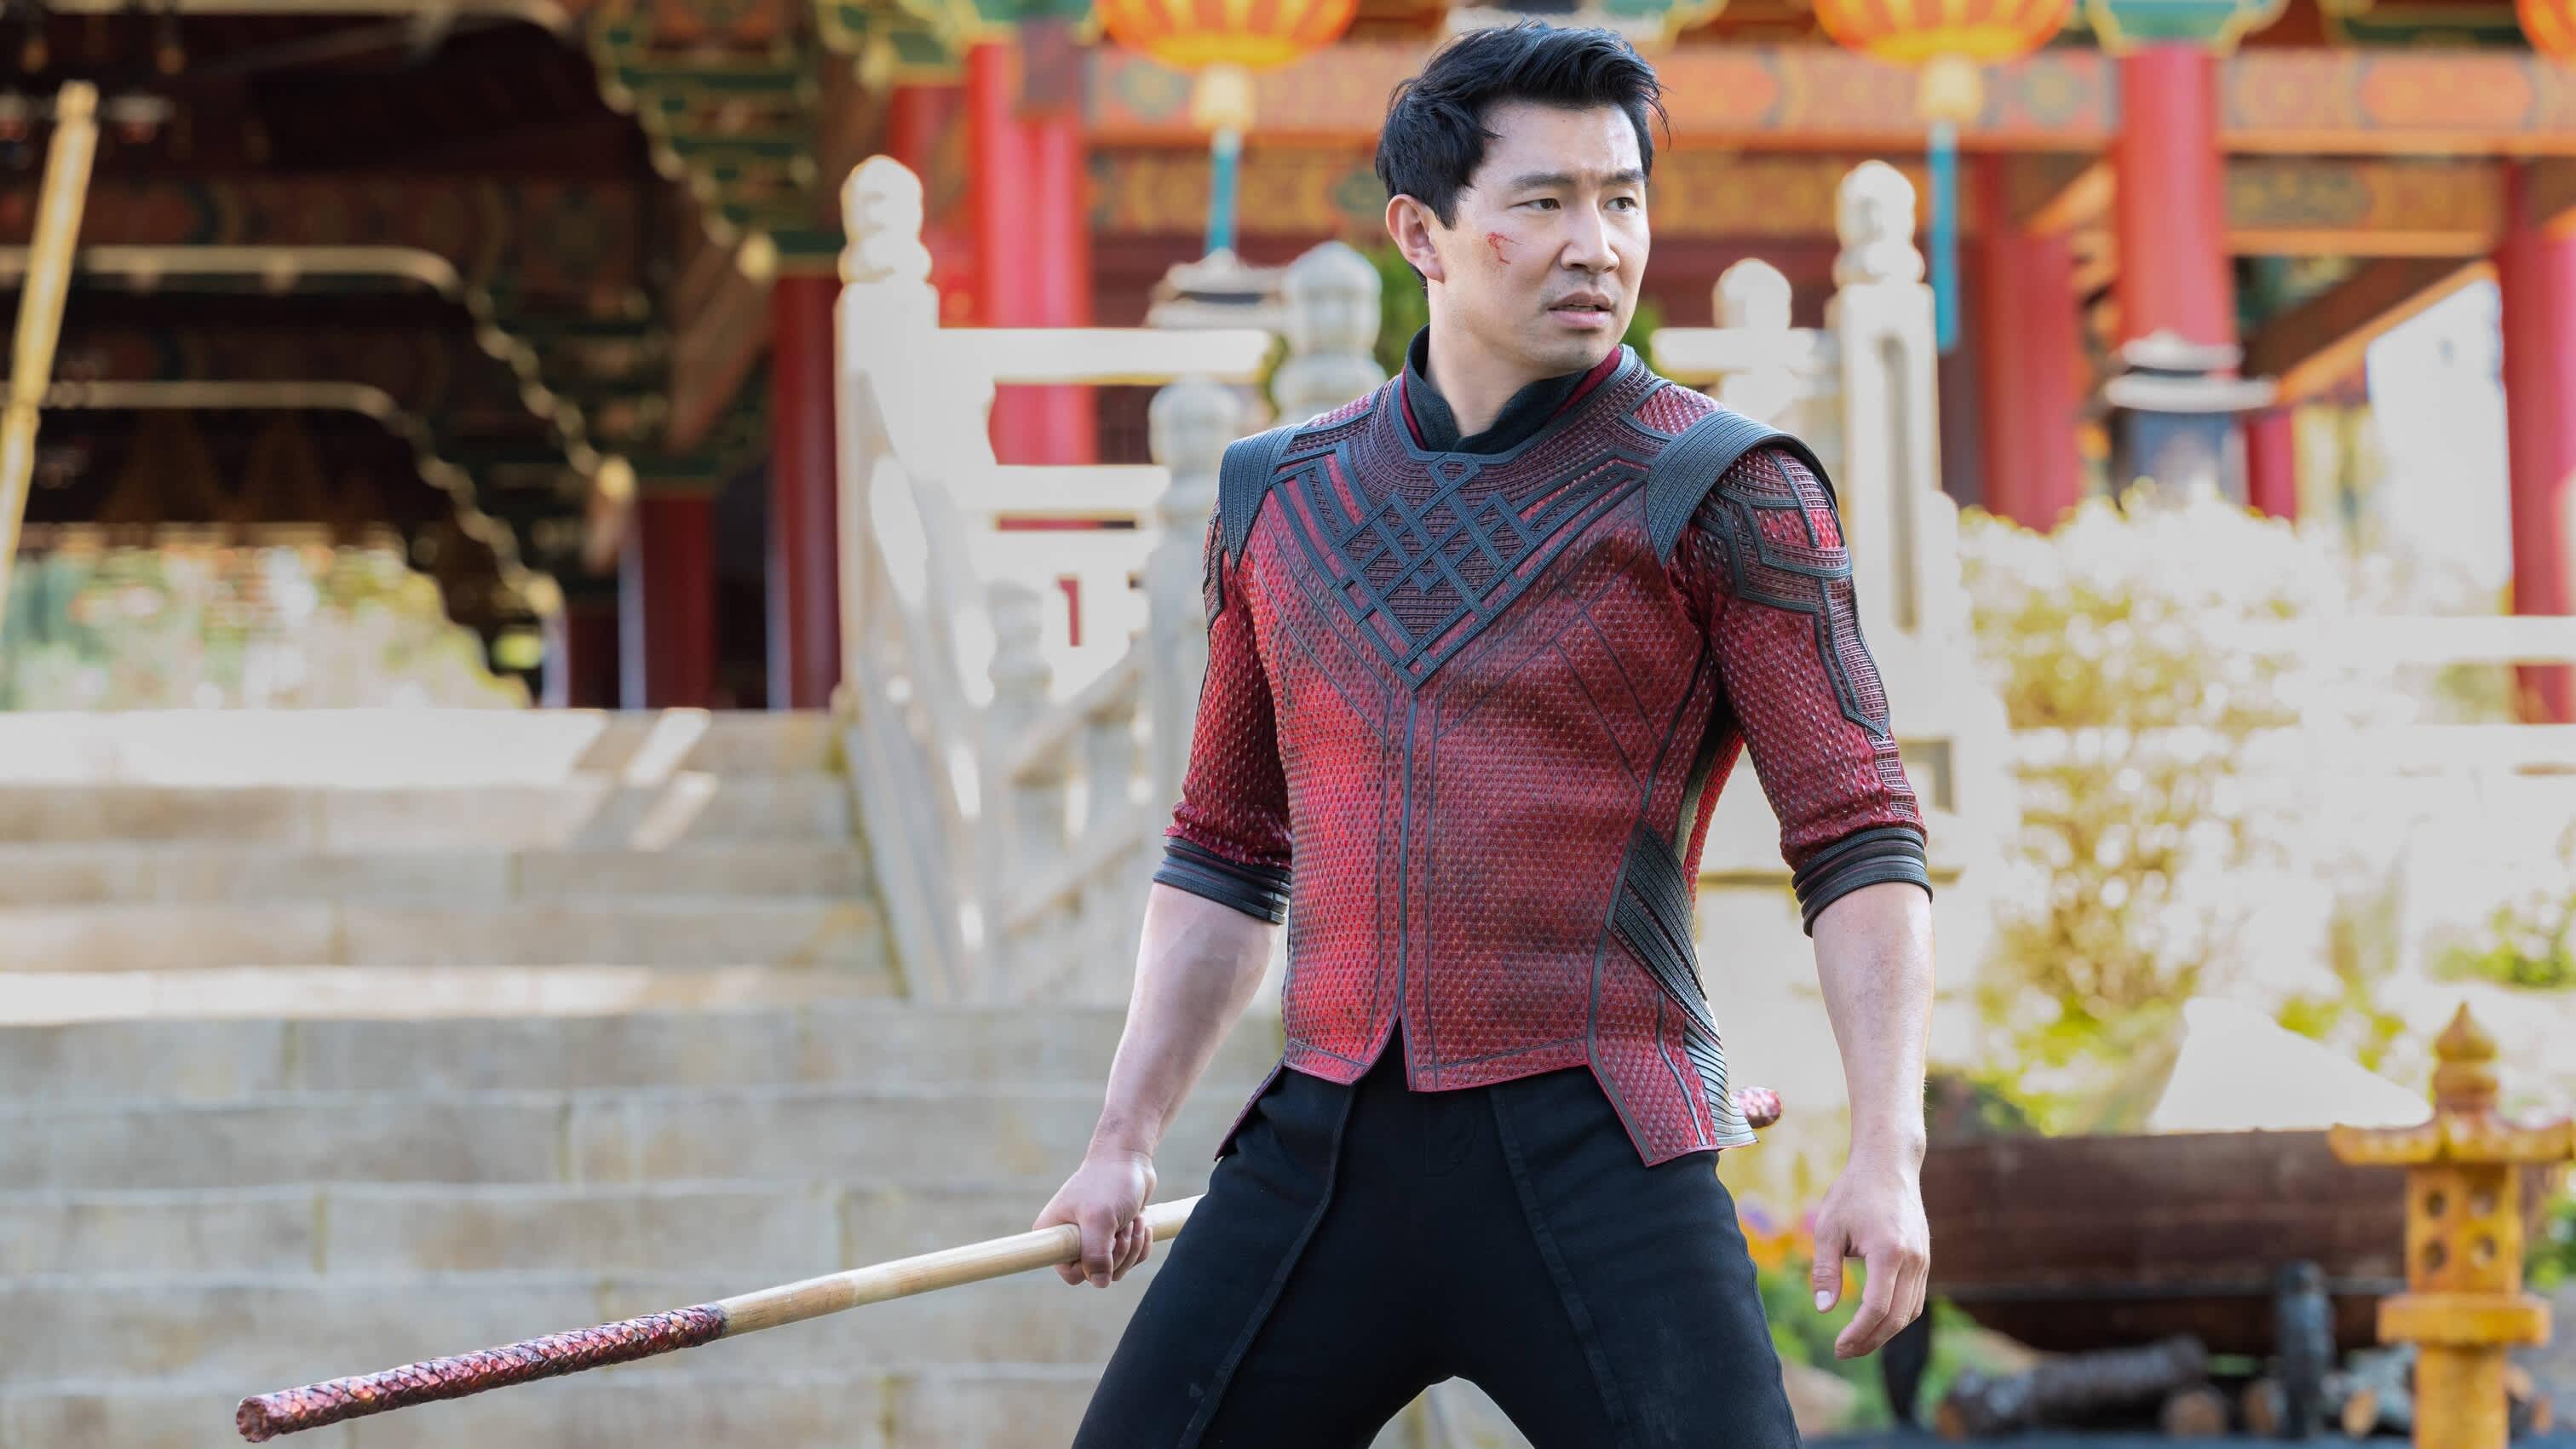 Marvel’s ‘Shang-Chi’ is now the highest-grossing domestic release of 2021 – CNBC